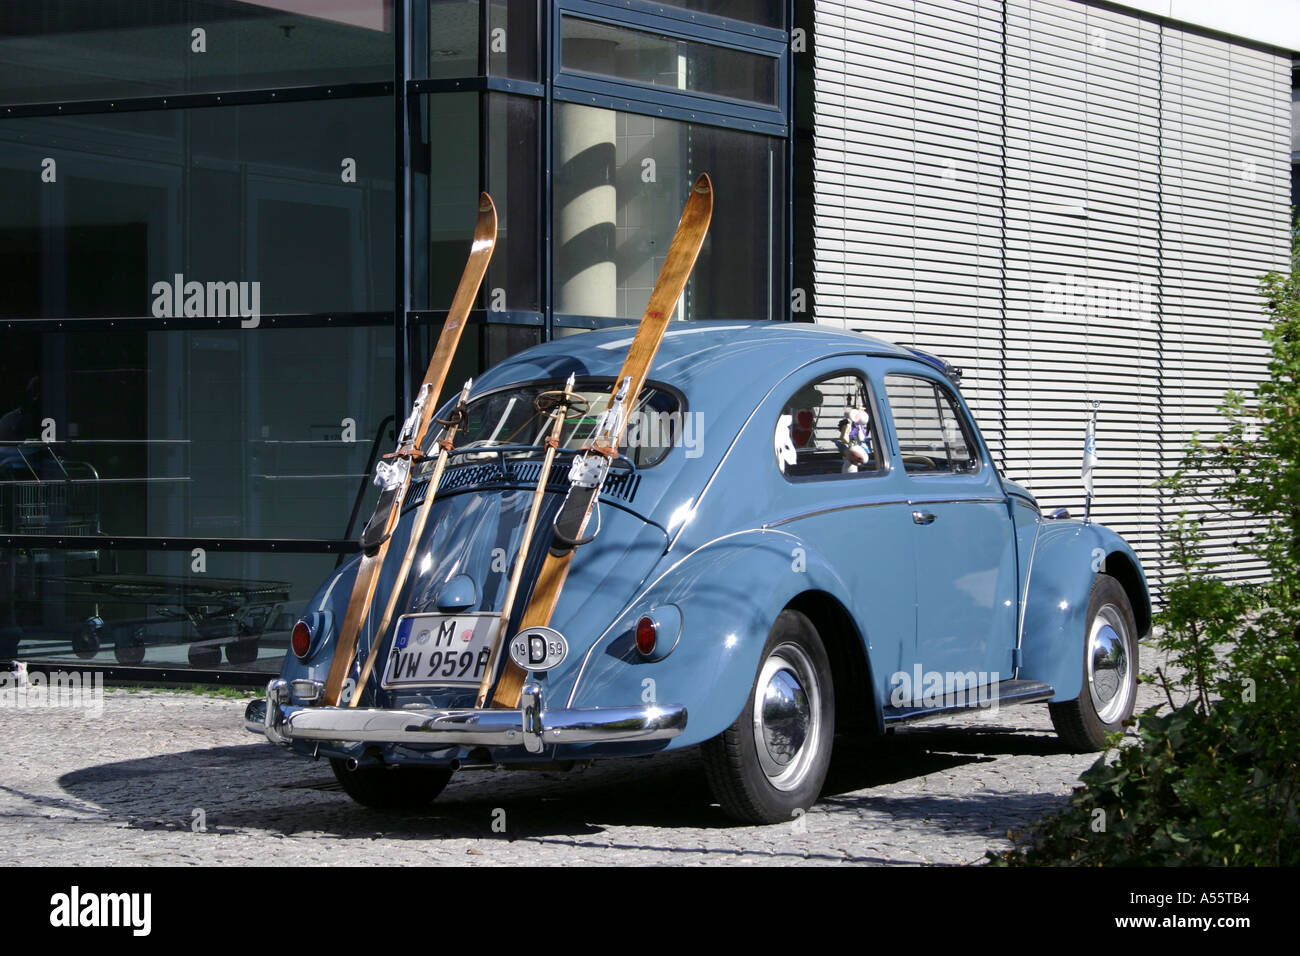 A Volkswagen 1959 beetle car with oldfashioned snow ski seen in Munich Bavaria Germany Stock Photo